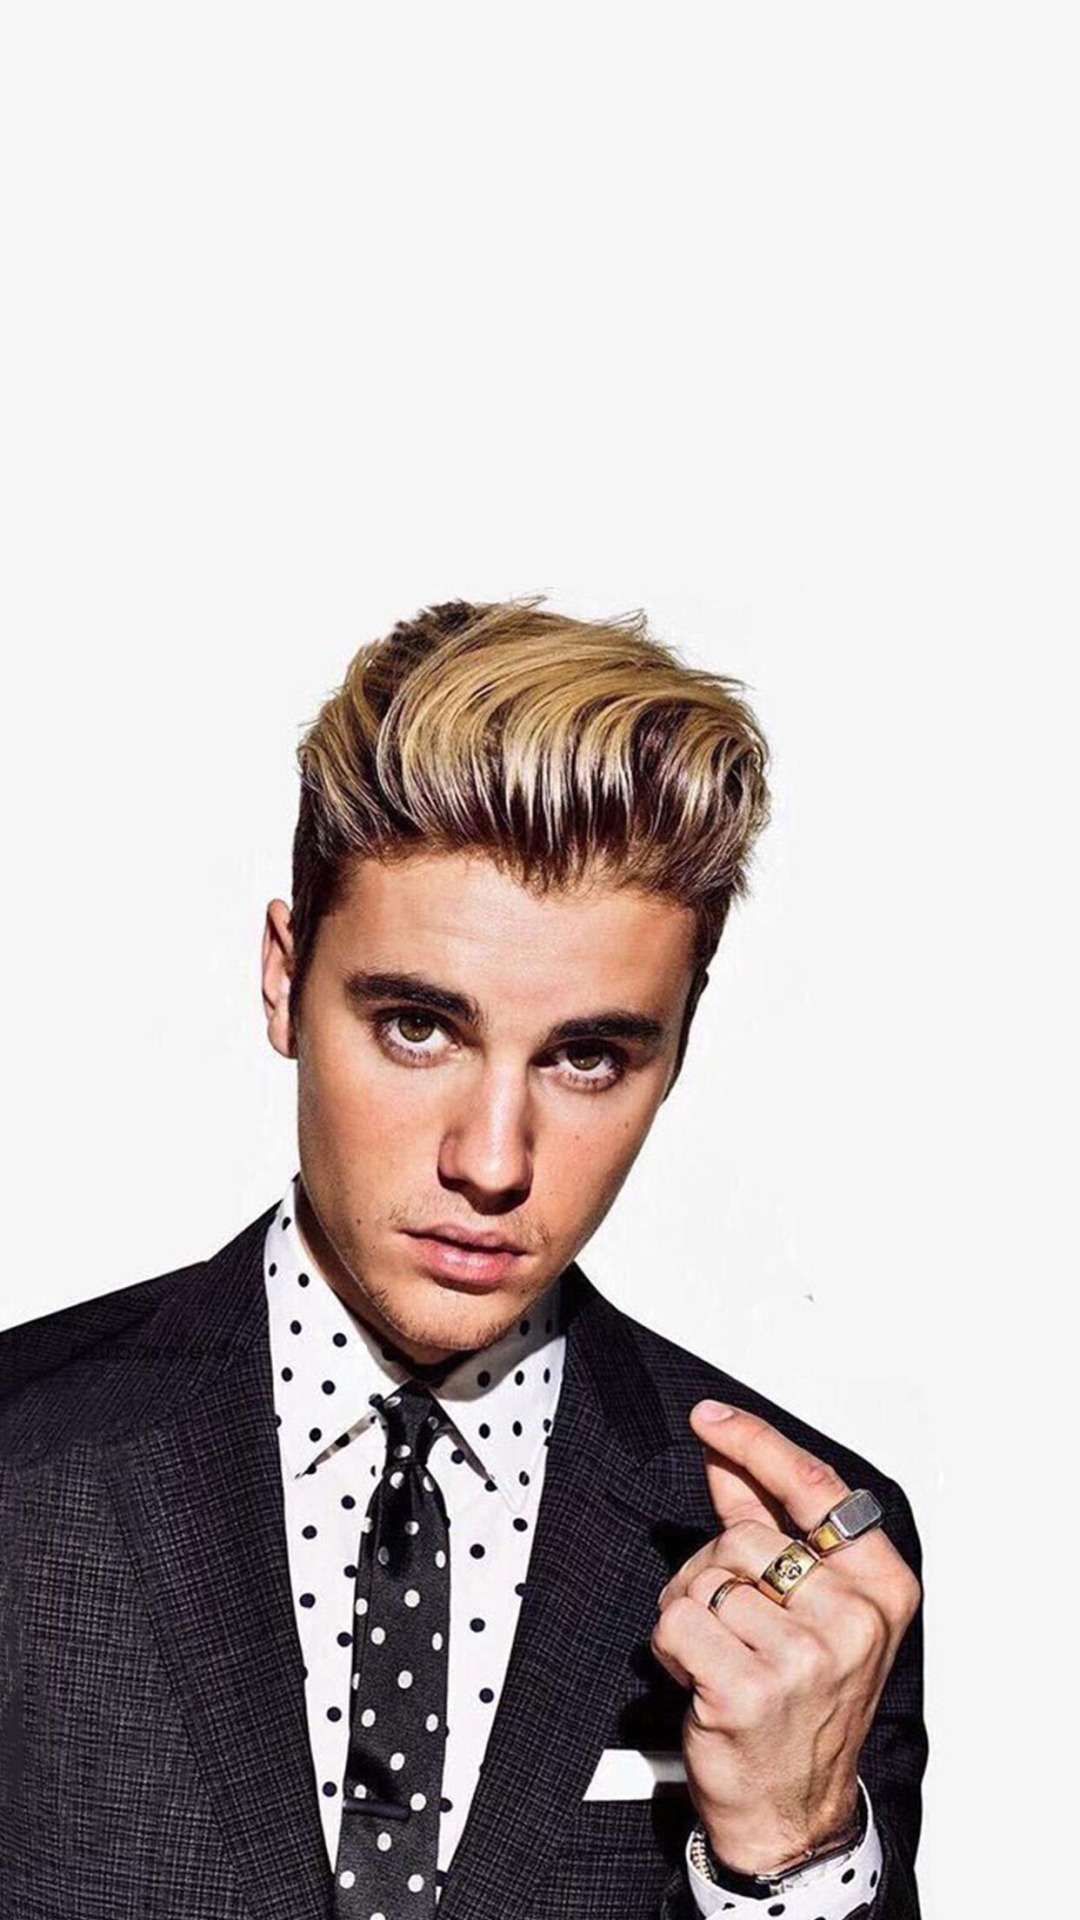 ✓[30+] Top 52 Justin Bieber HD Wallpaper and Latest Image - Android /  iPhone HD Wallpaper Background Download (png / jpg) (2023)